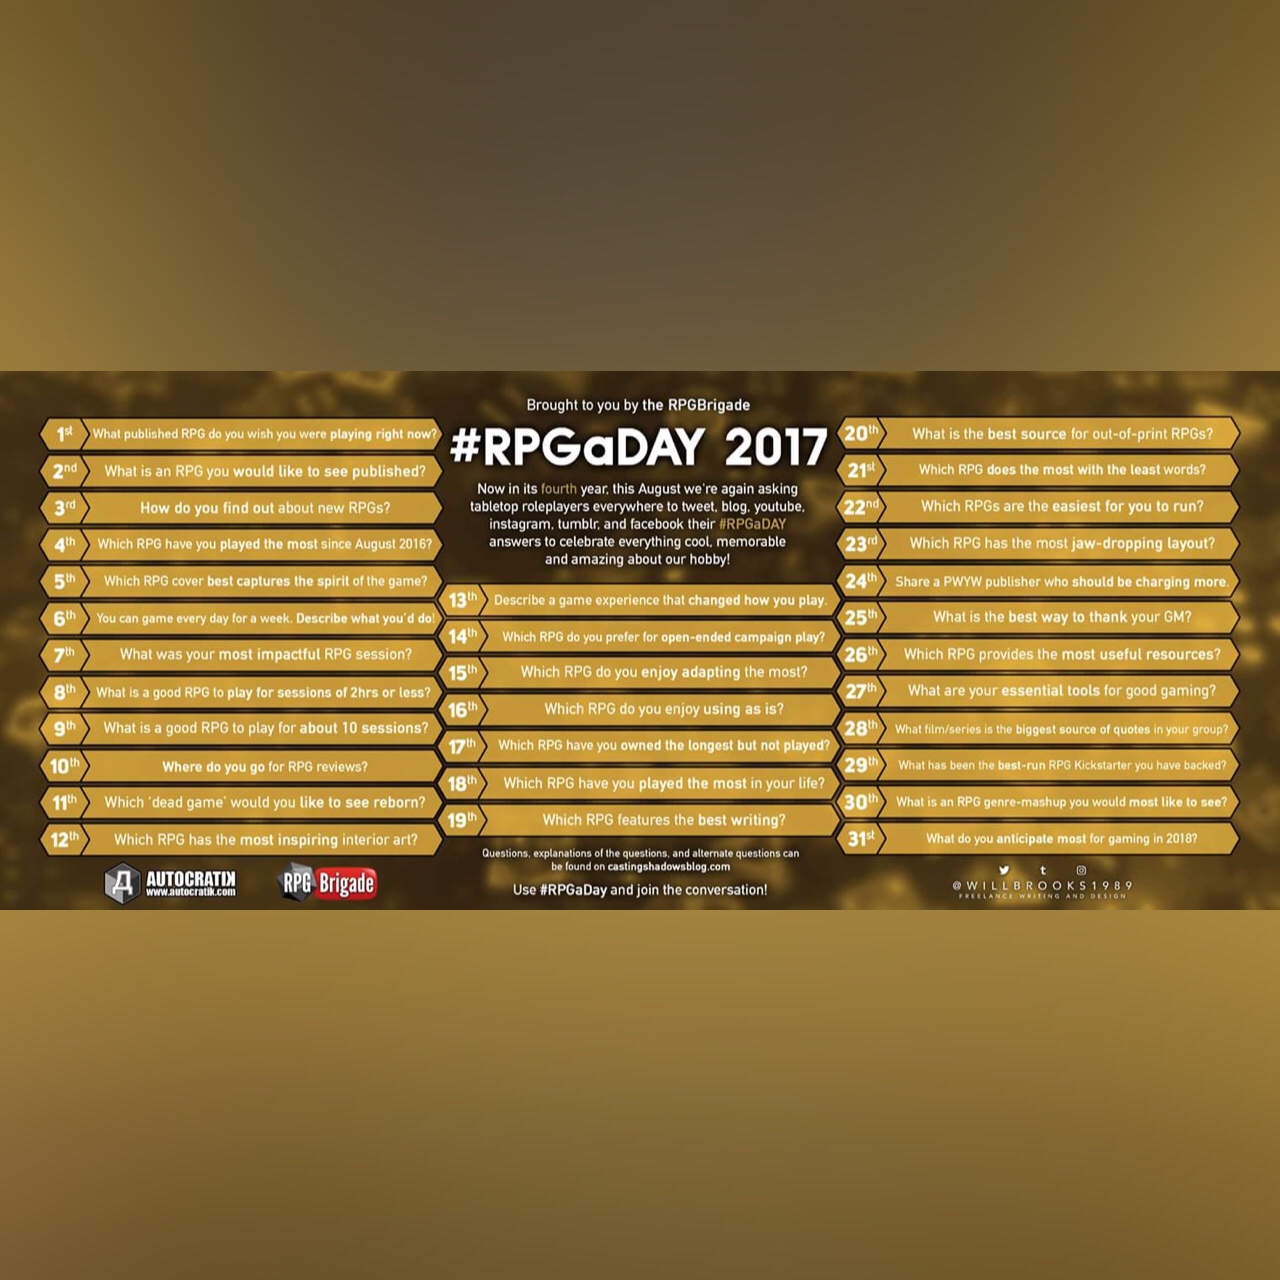 RPGaDAY 2017 August 15th What RPG do you enjoy adapting the most?